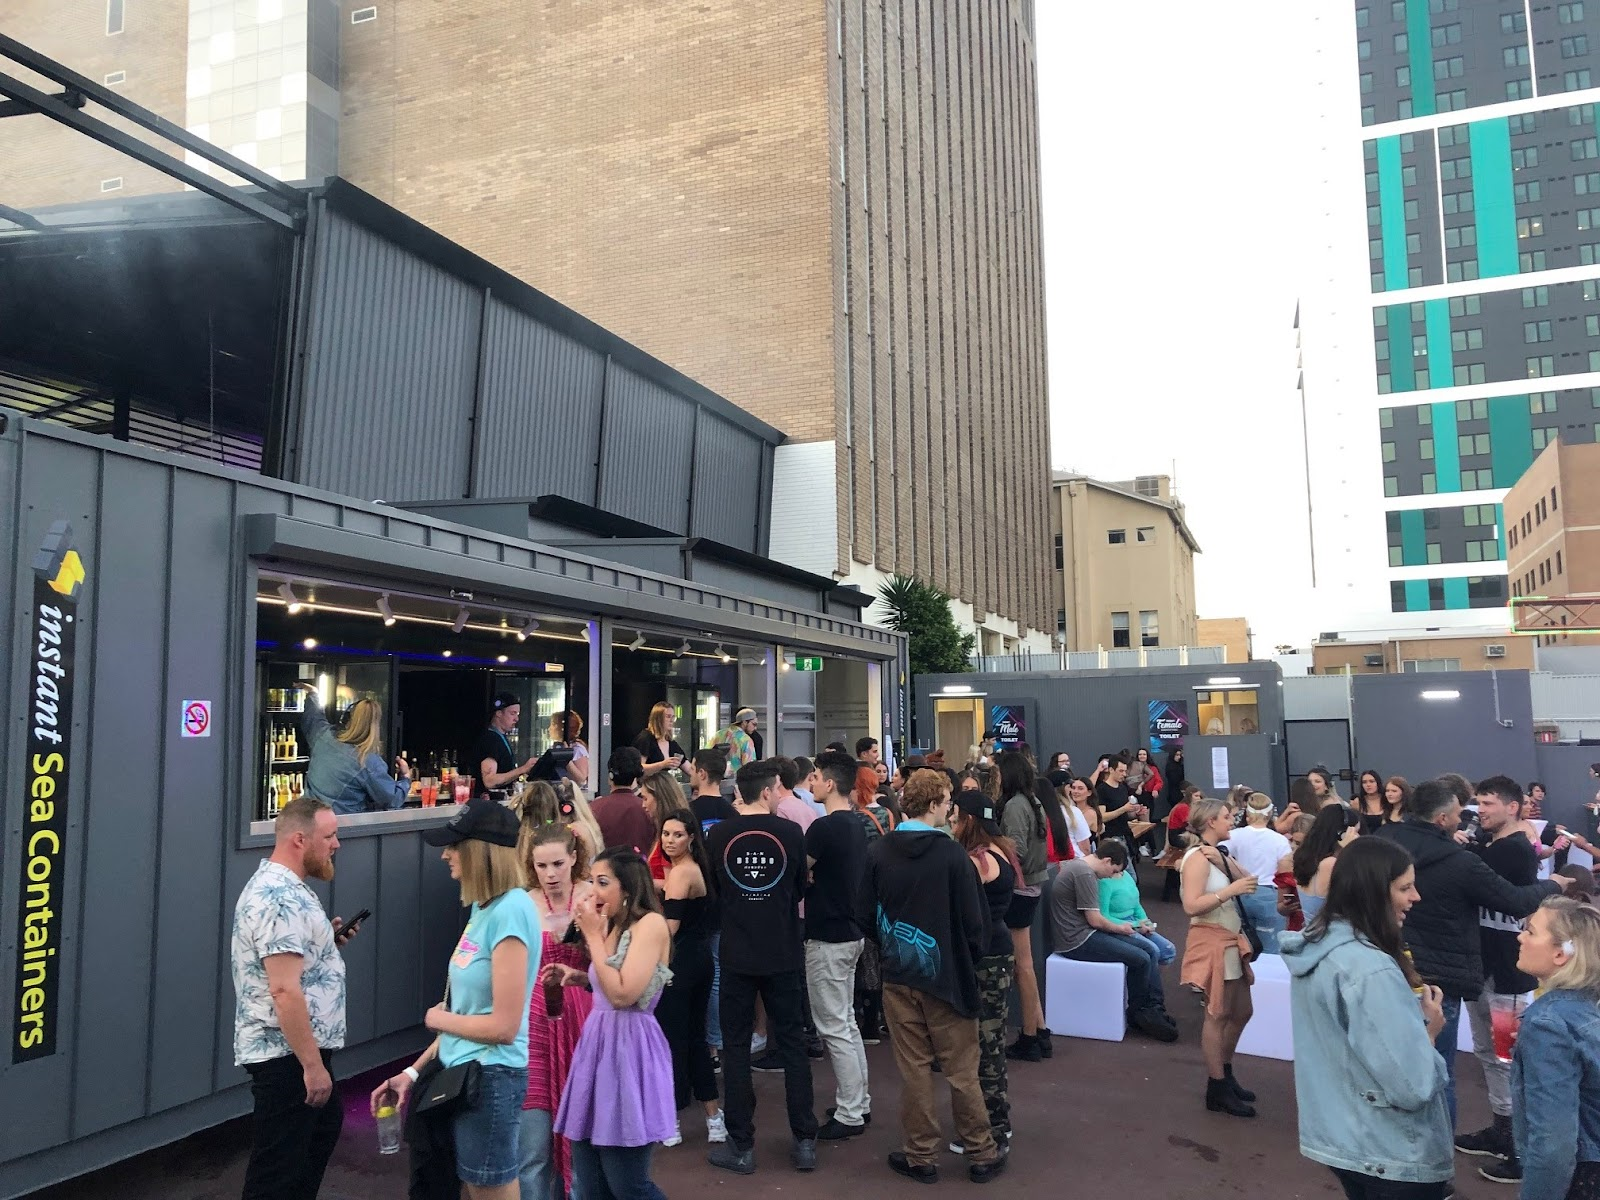 Crowd of people at an outdoor event featuring bars made from modified shipping containers in an urban setting.